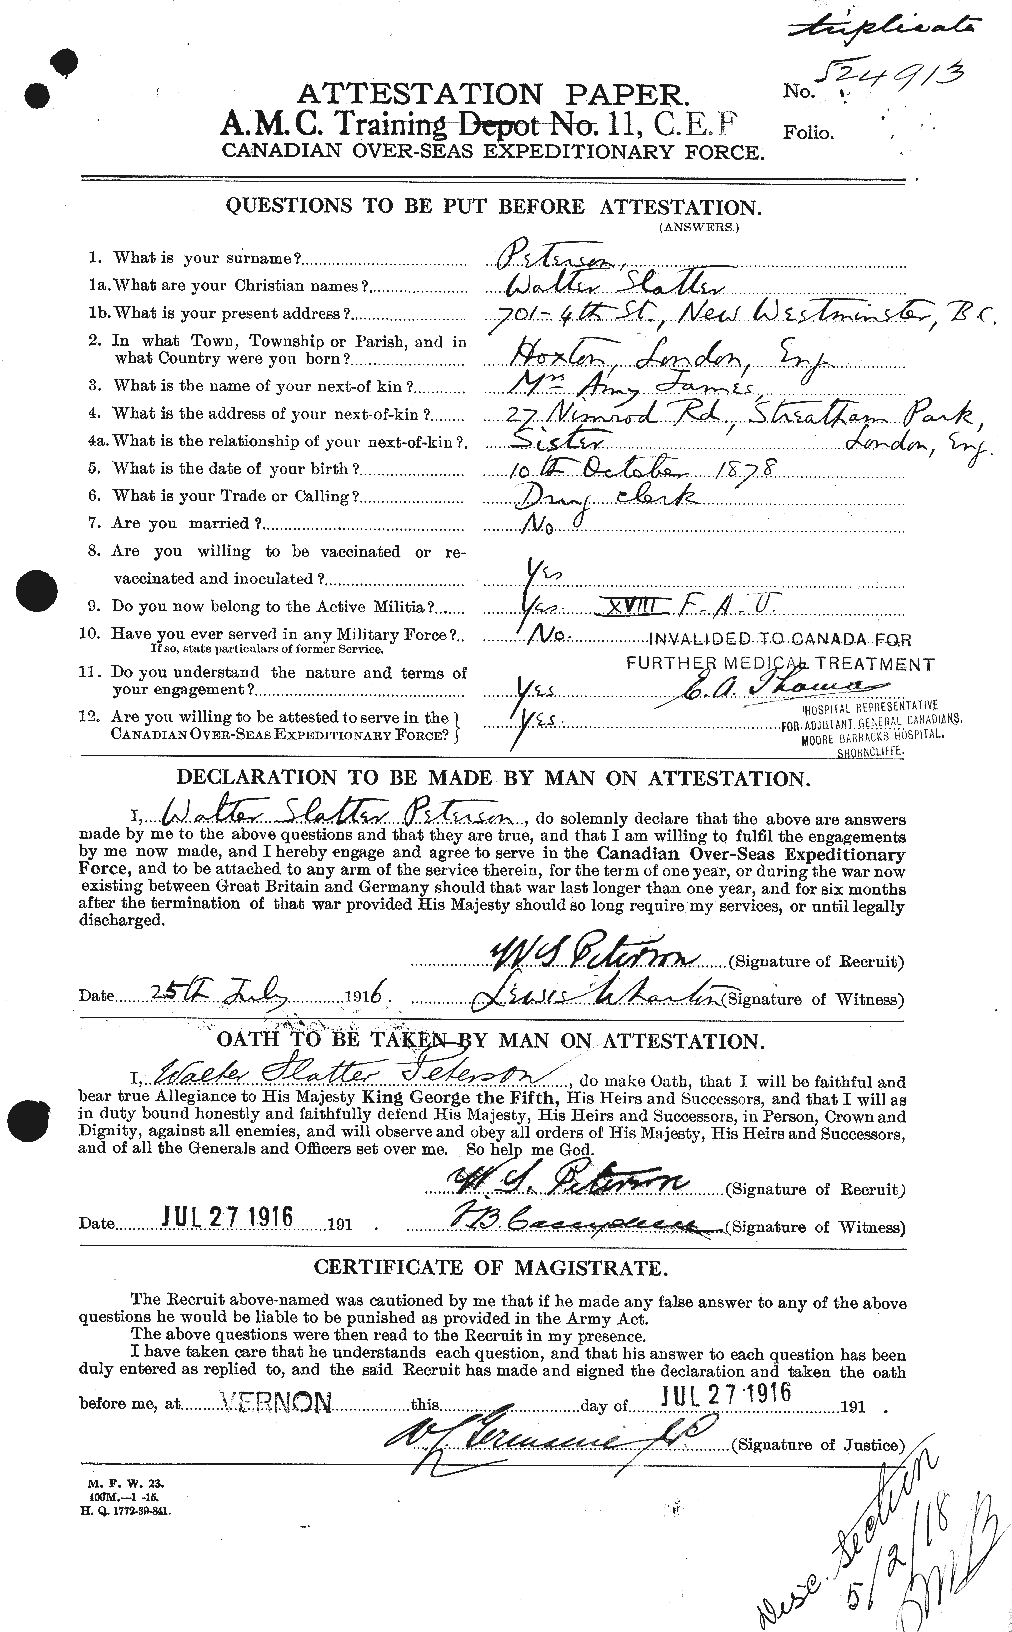 Personnel Records of the First World War - CEF 576073a